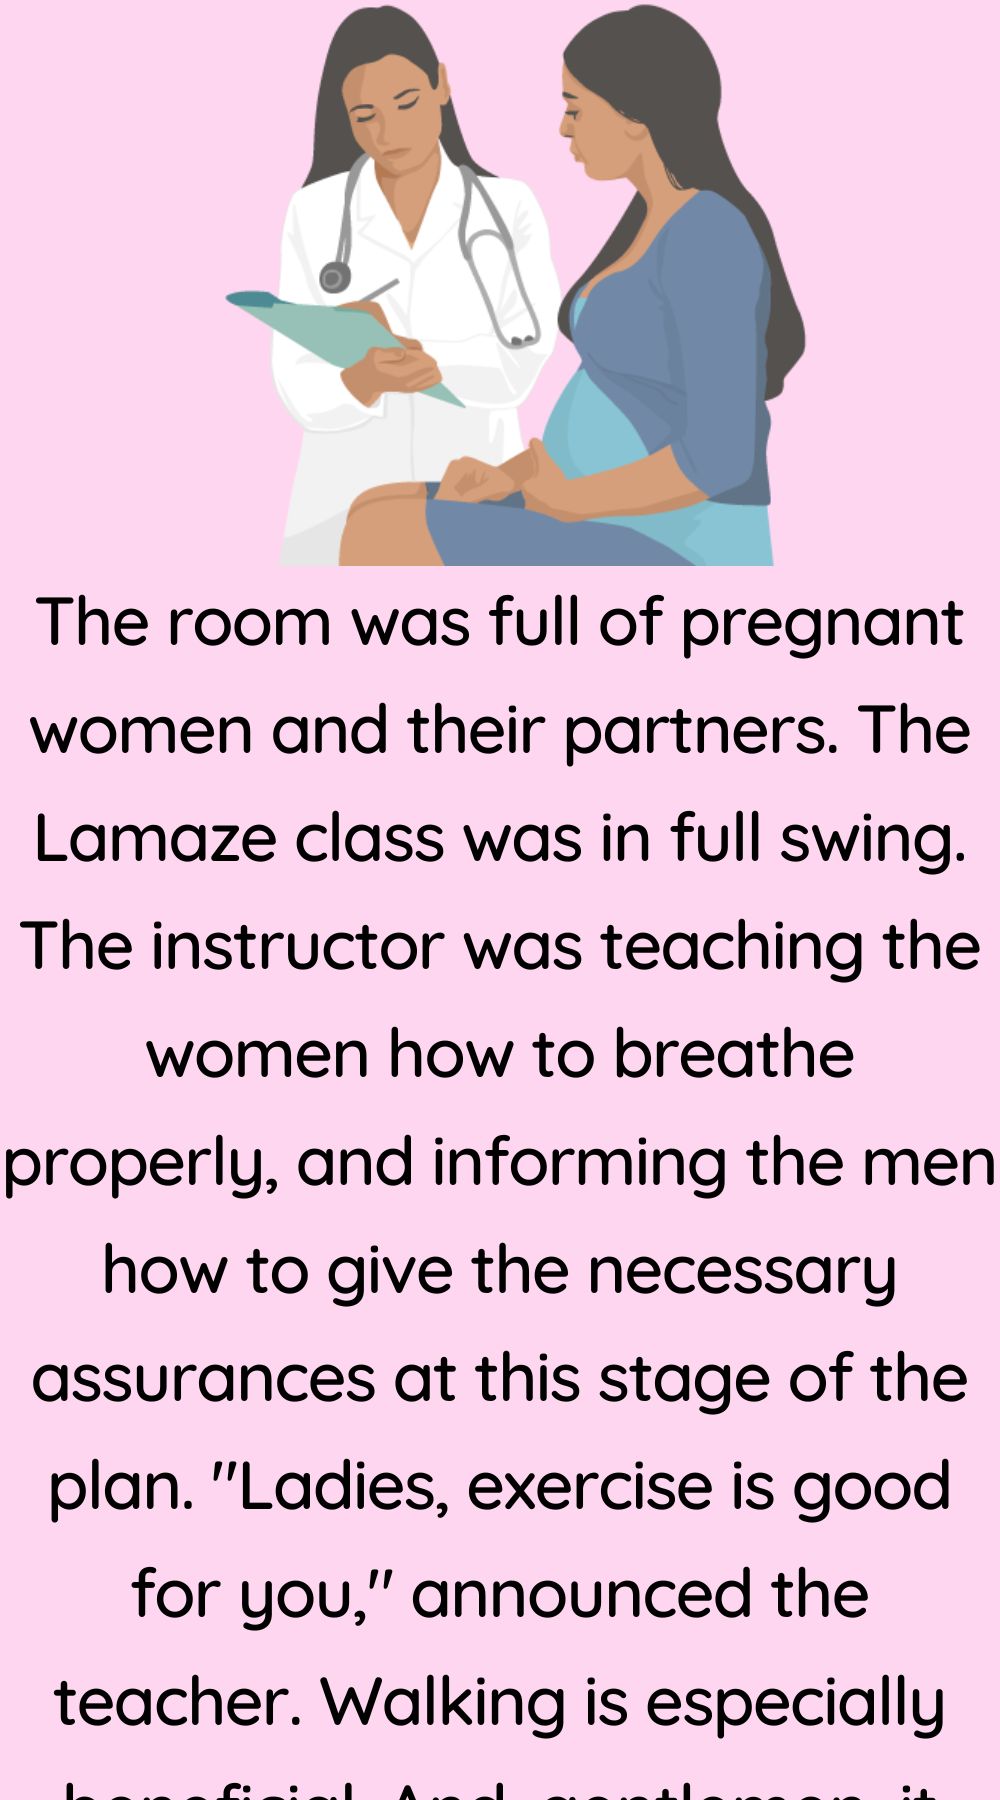 The room was full of pregnant women 